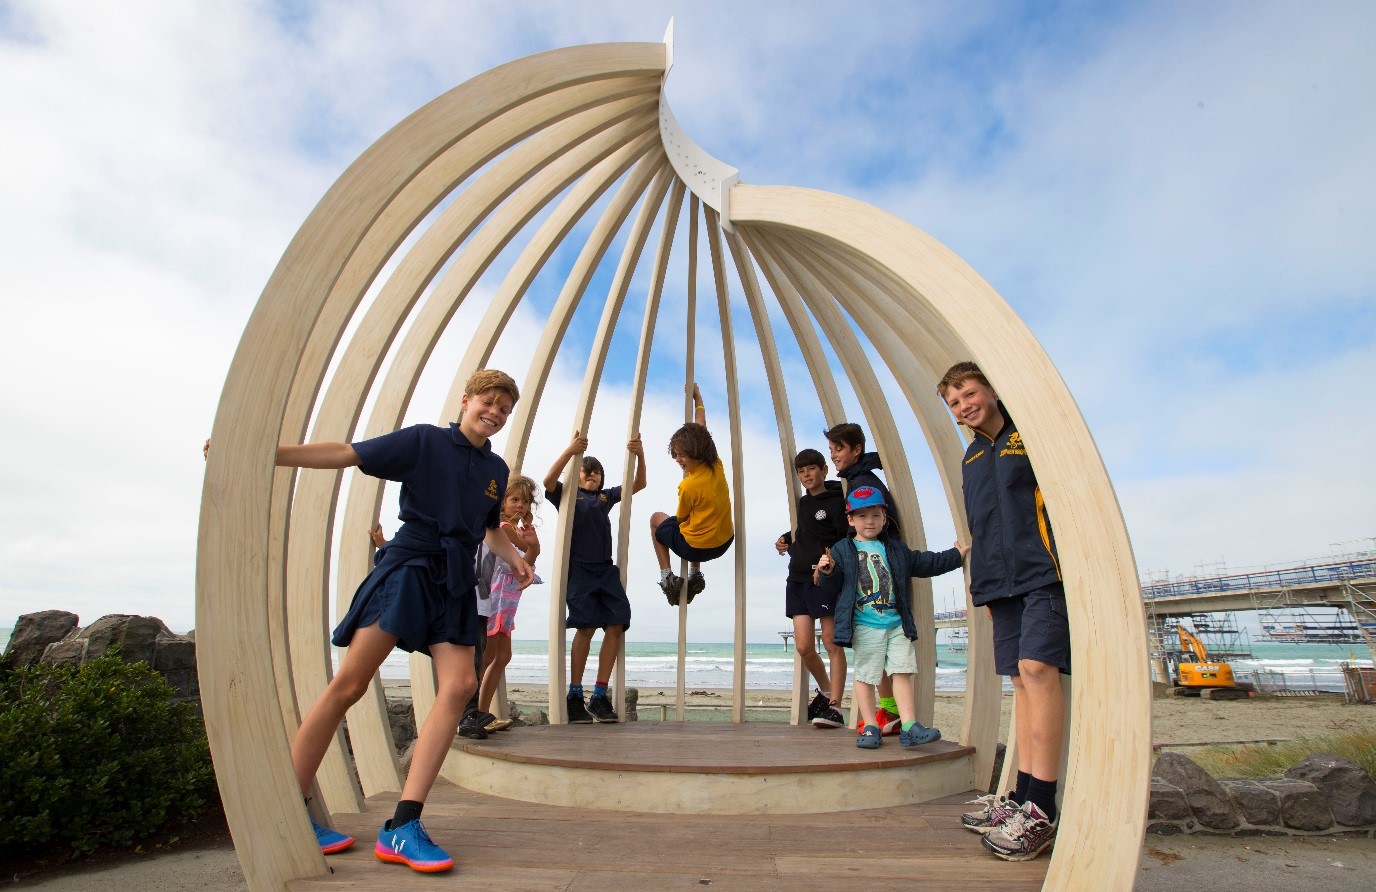 Children pose inside a shell shaped wooden structure